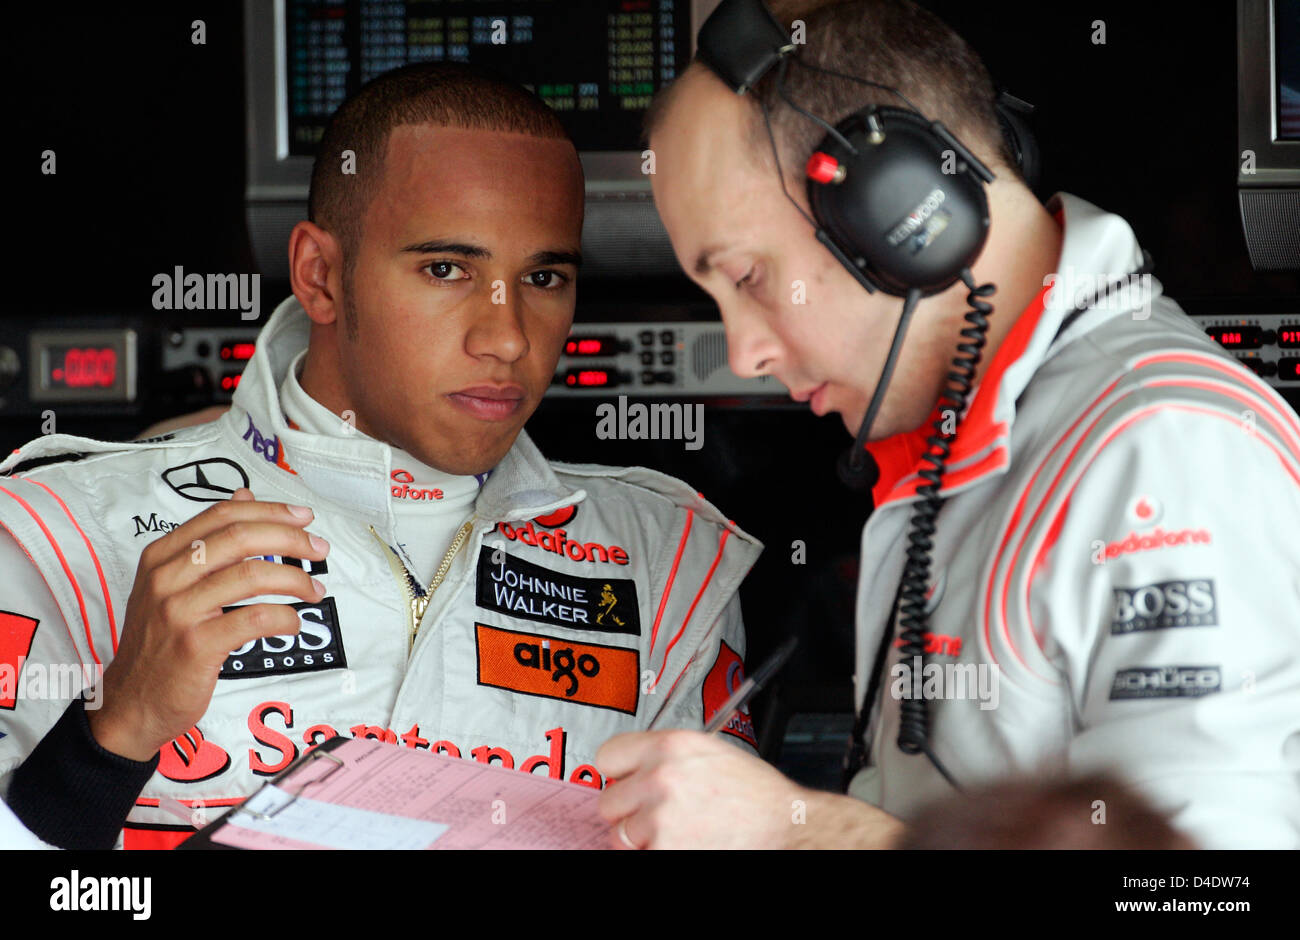 British Formula One driver Lewis Hamilton of McLaren Mercedes (L) confers with his race engineer Phil Prew (R) during the first practice session at Circuit de Catalunya in Montmelo near Barcelona, Spain, 24 April 2008. The Formula 1 Grand Prix of Spain be held here on 27 April. Photo: Felix Heyder Stock Photo